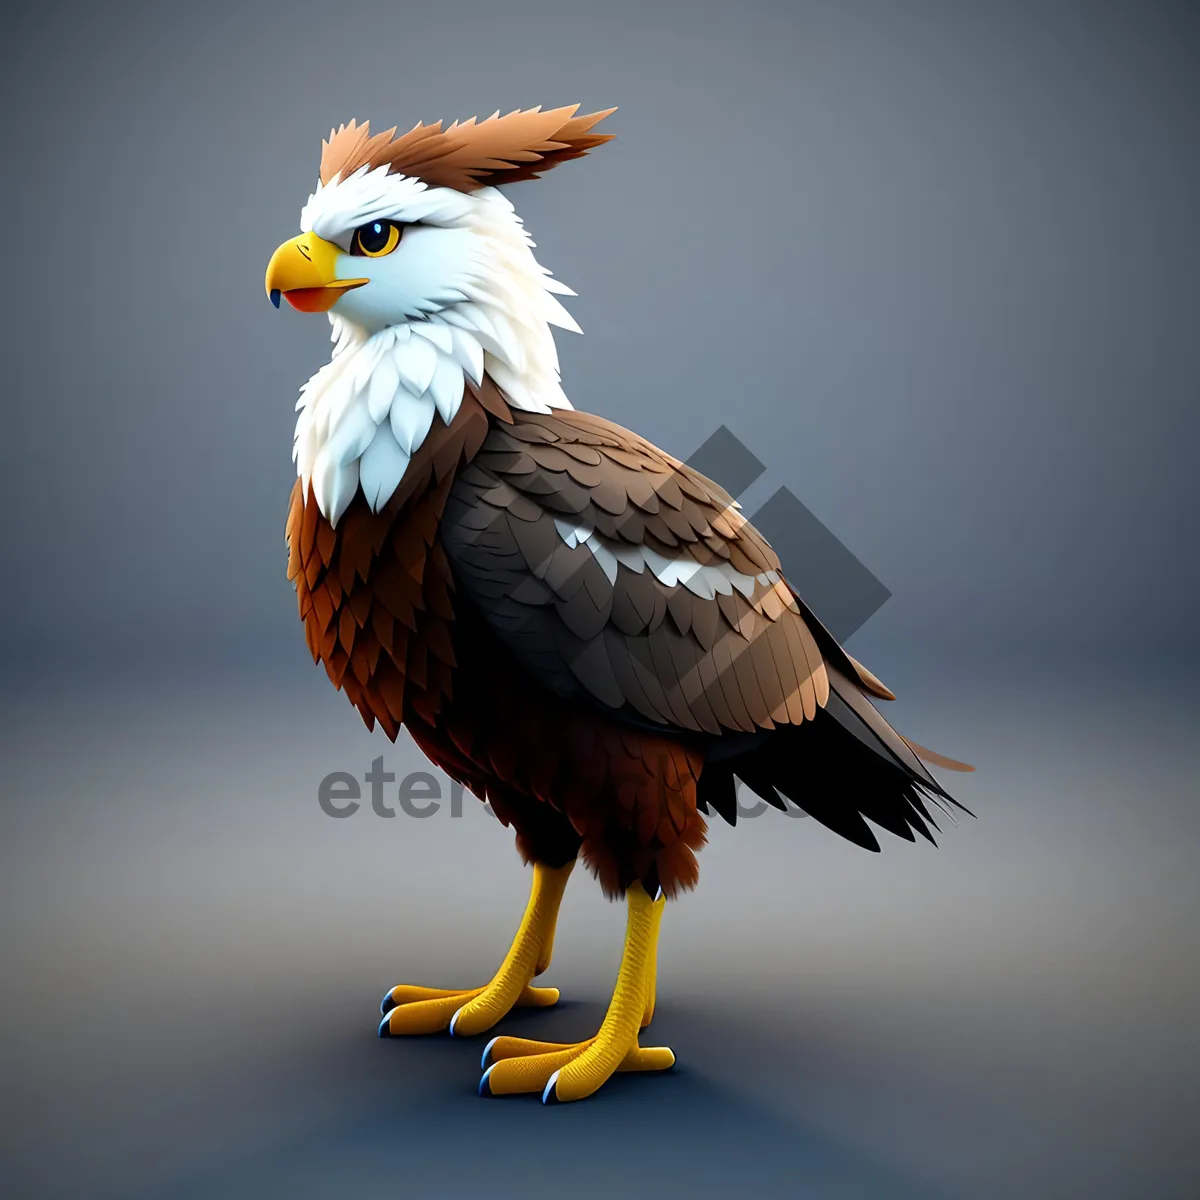 Picture of Bald Eagle with Majestic Wings Soaring High